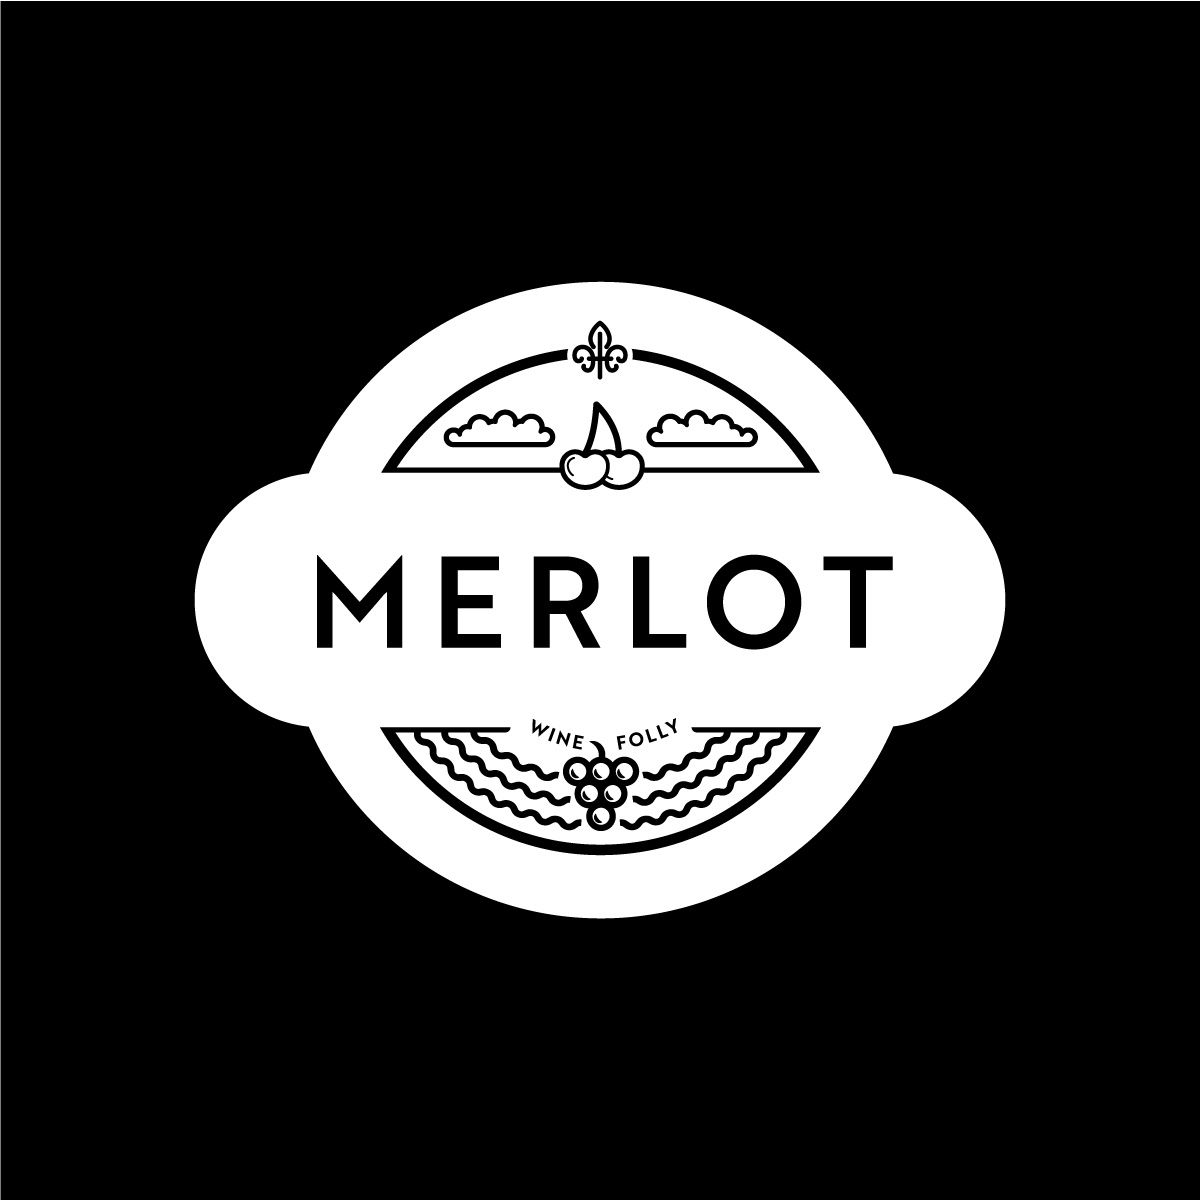 Merlot Wine Facts Seal by Wine Folly